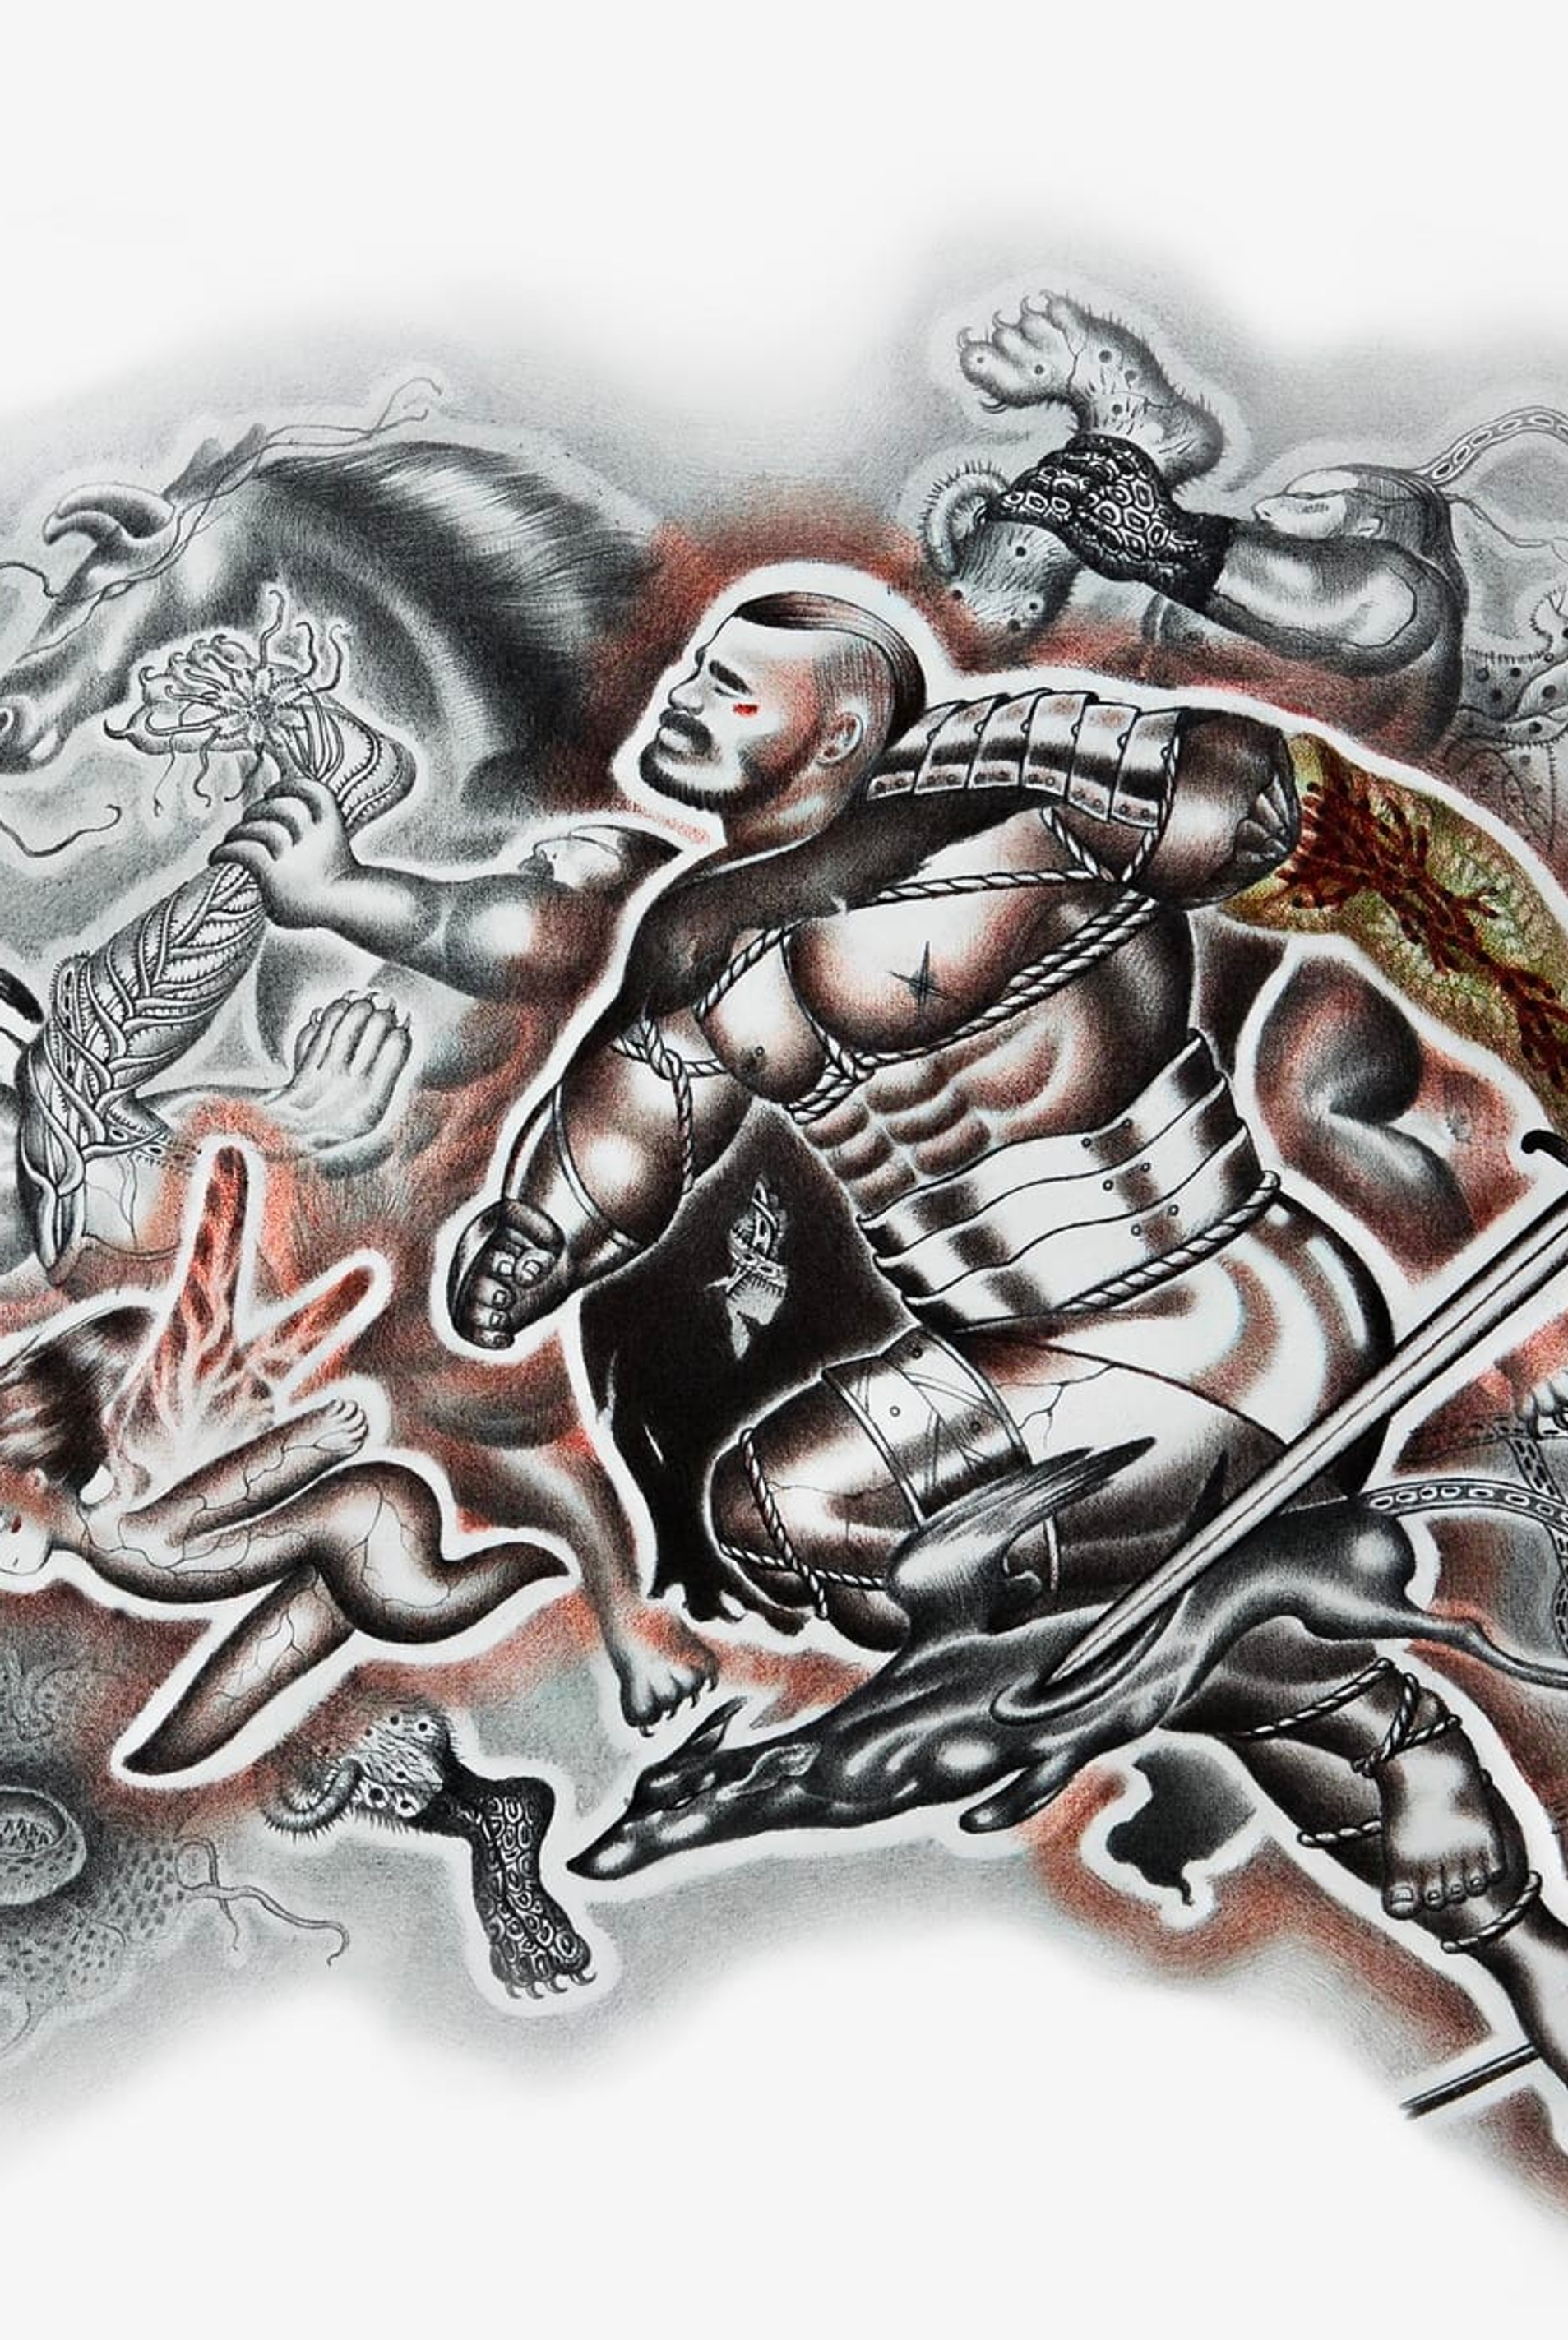 An image by Hao Zhang, of drawn figures in movement, in tones of black, white and bronze, including a horse, winged creatures and a bearded man wearing armour, a cape and carrying a sword.